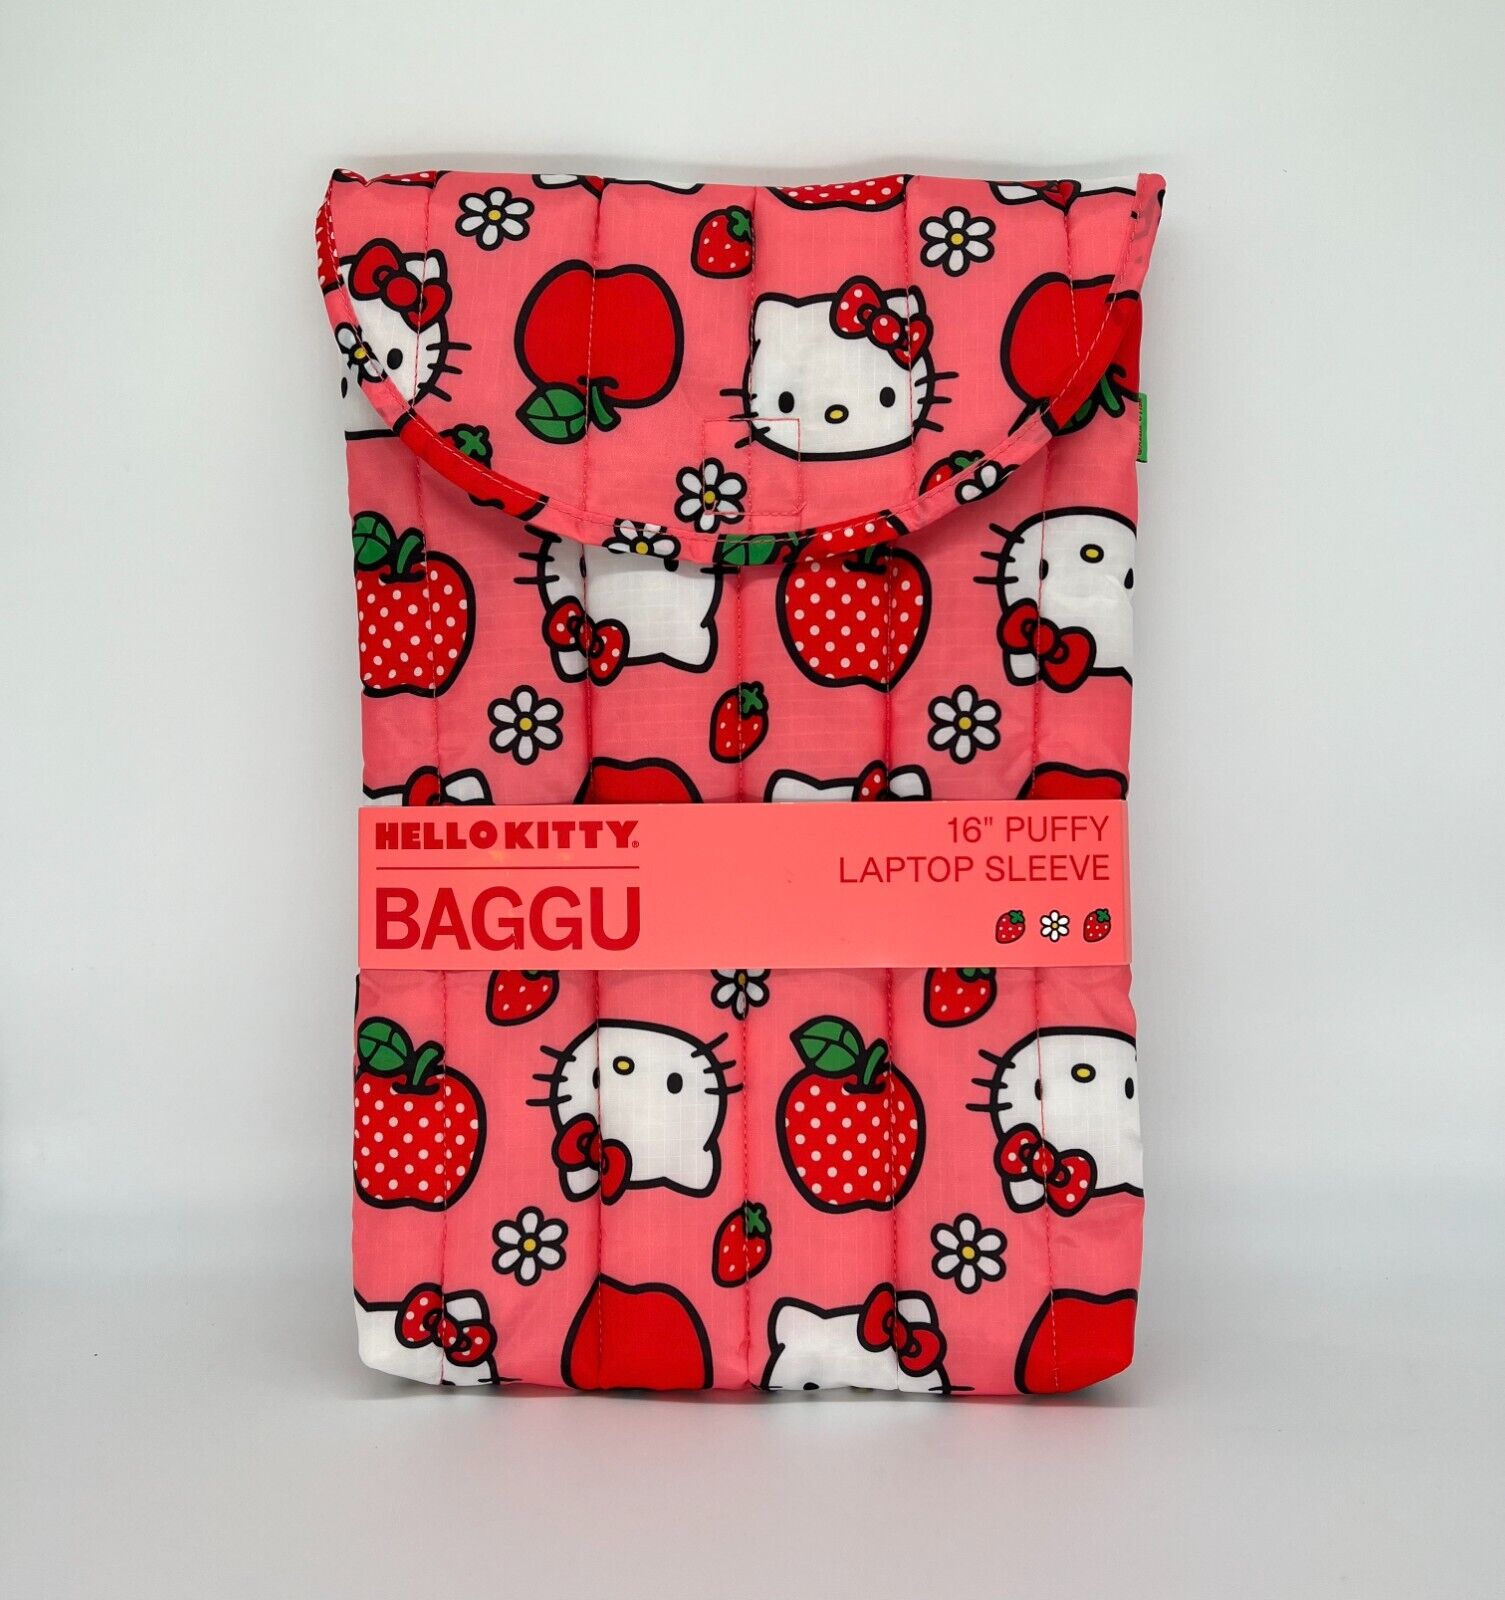 NWT Baggu Hello Kitty 16 Inches Puffy Laptop Sleeve Apples